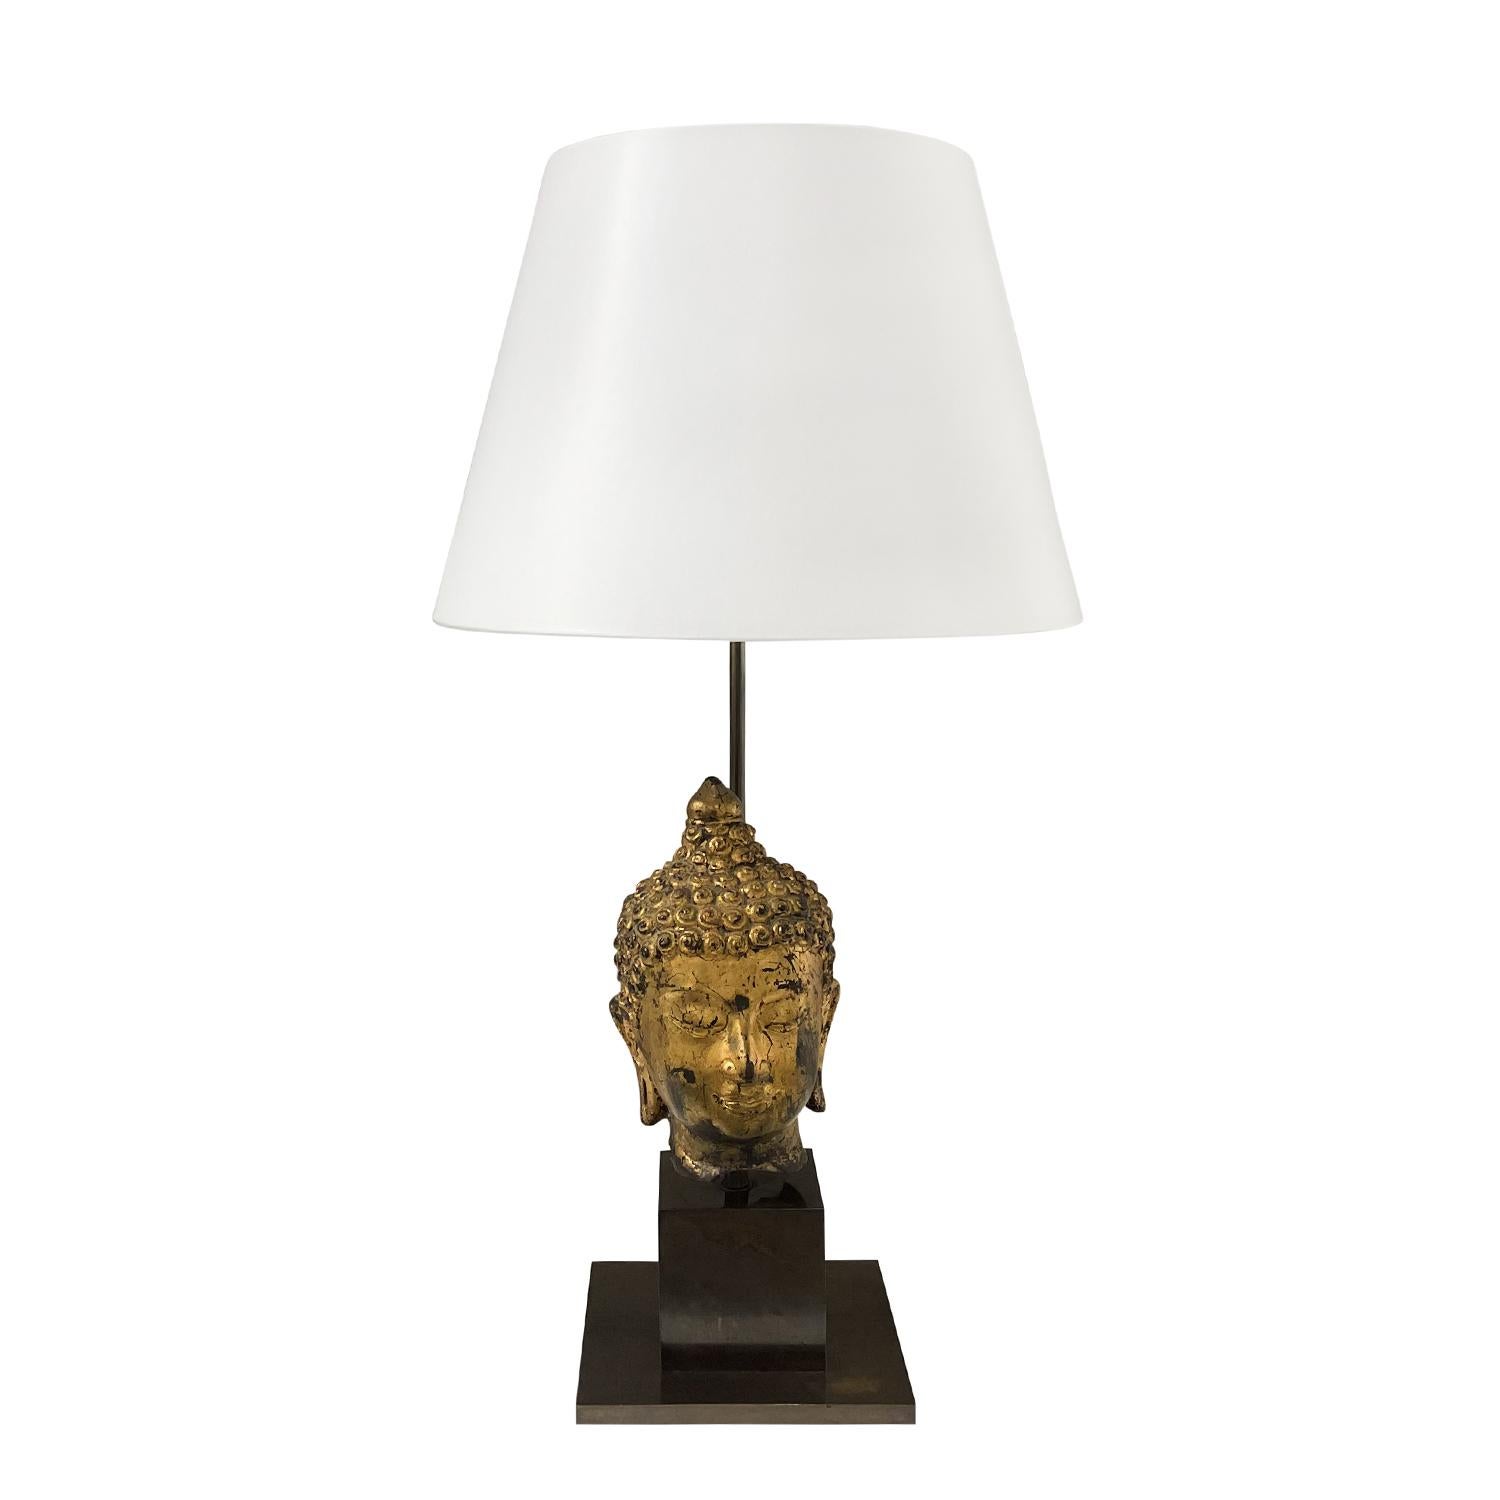 A late vintage Mid-Century Modern Asian Buddha table lamp with a new white round shade, made of hand crafted wood, in good condition. The detailed gold patinated head is supported by a rectangular metal base, featuring a one light socket. The wires